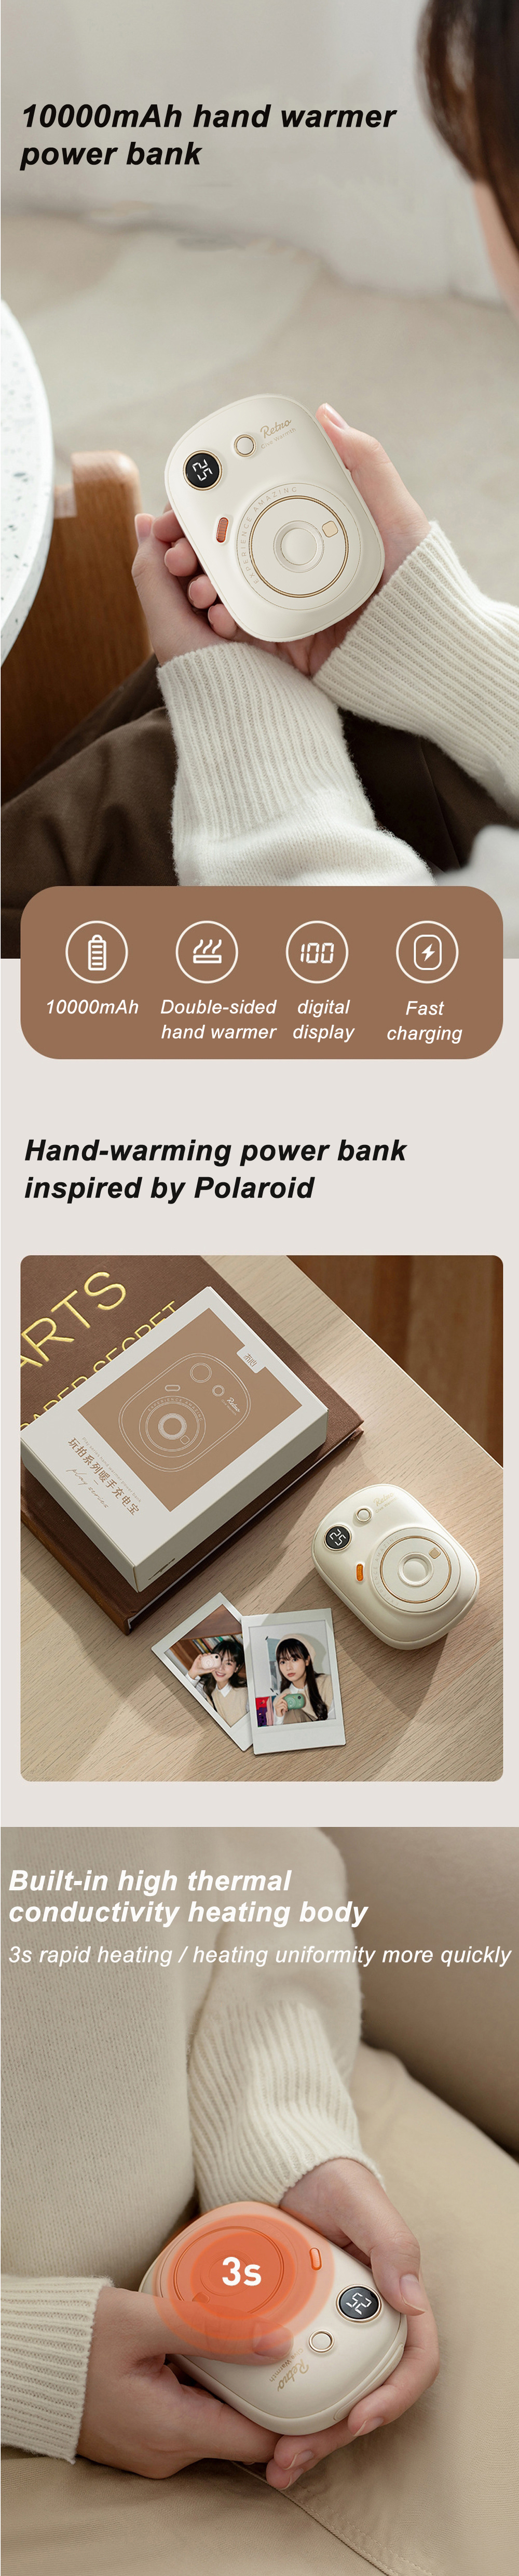 MAOXIN-10000mAh-2-in-1-Electric-Hand-Warmer-Power-Bank-3-Levels-Portable-USB-Rechargeable-Double-Sid-1910658-1